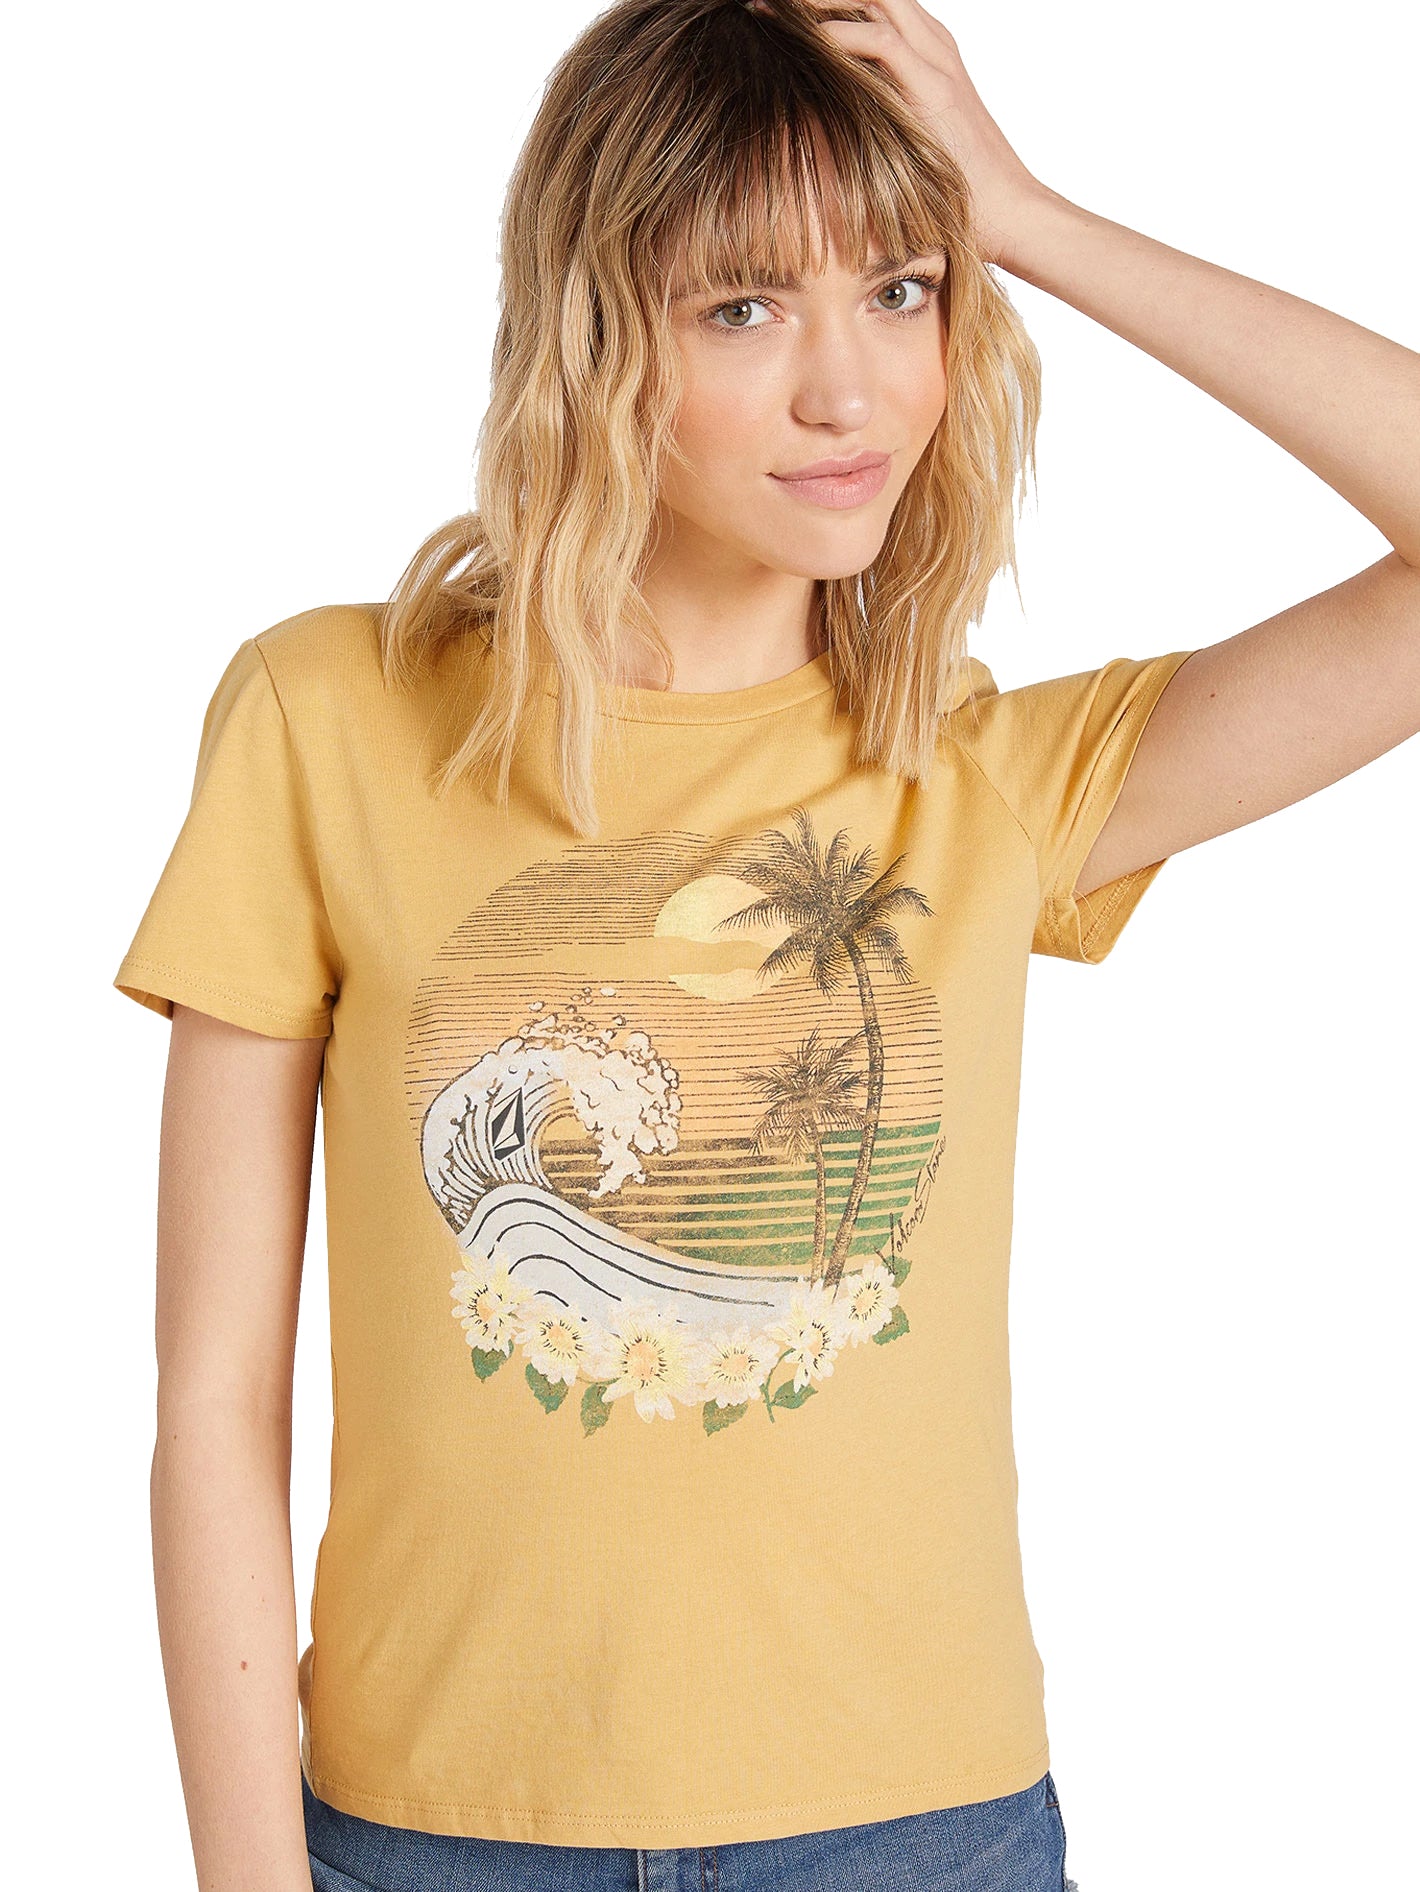 Volcom Stoked On Stone Graphic Tee DGD XL